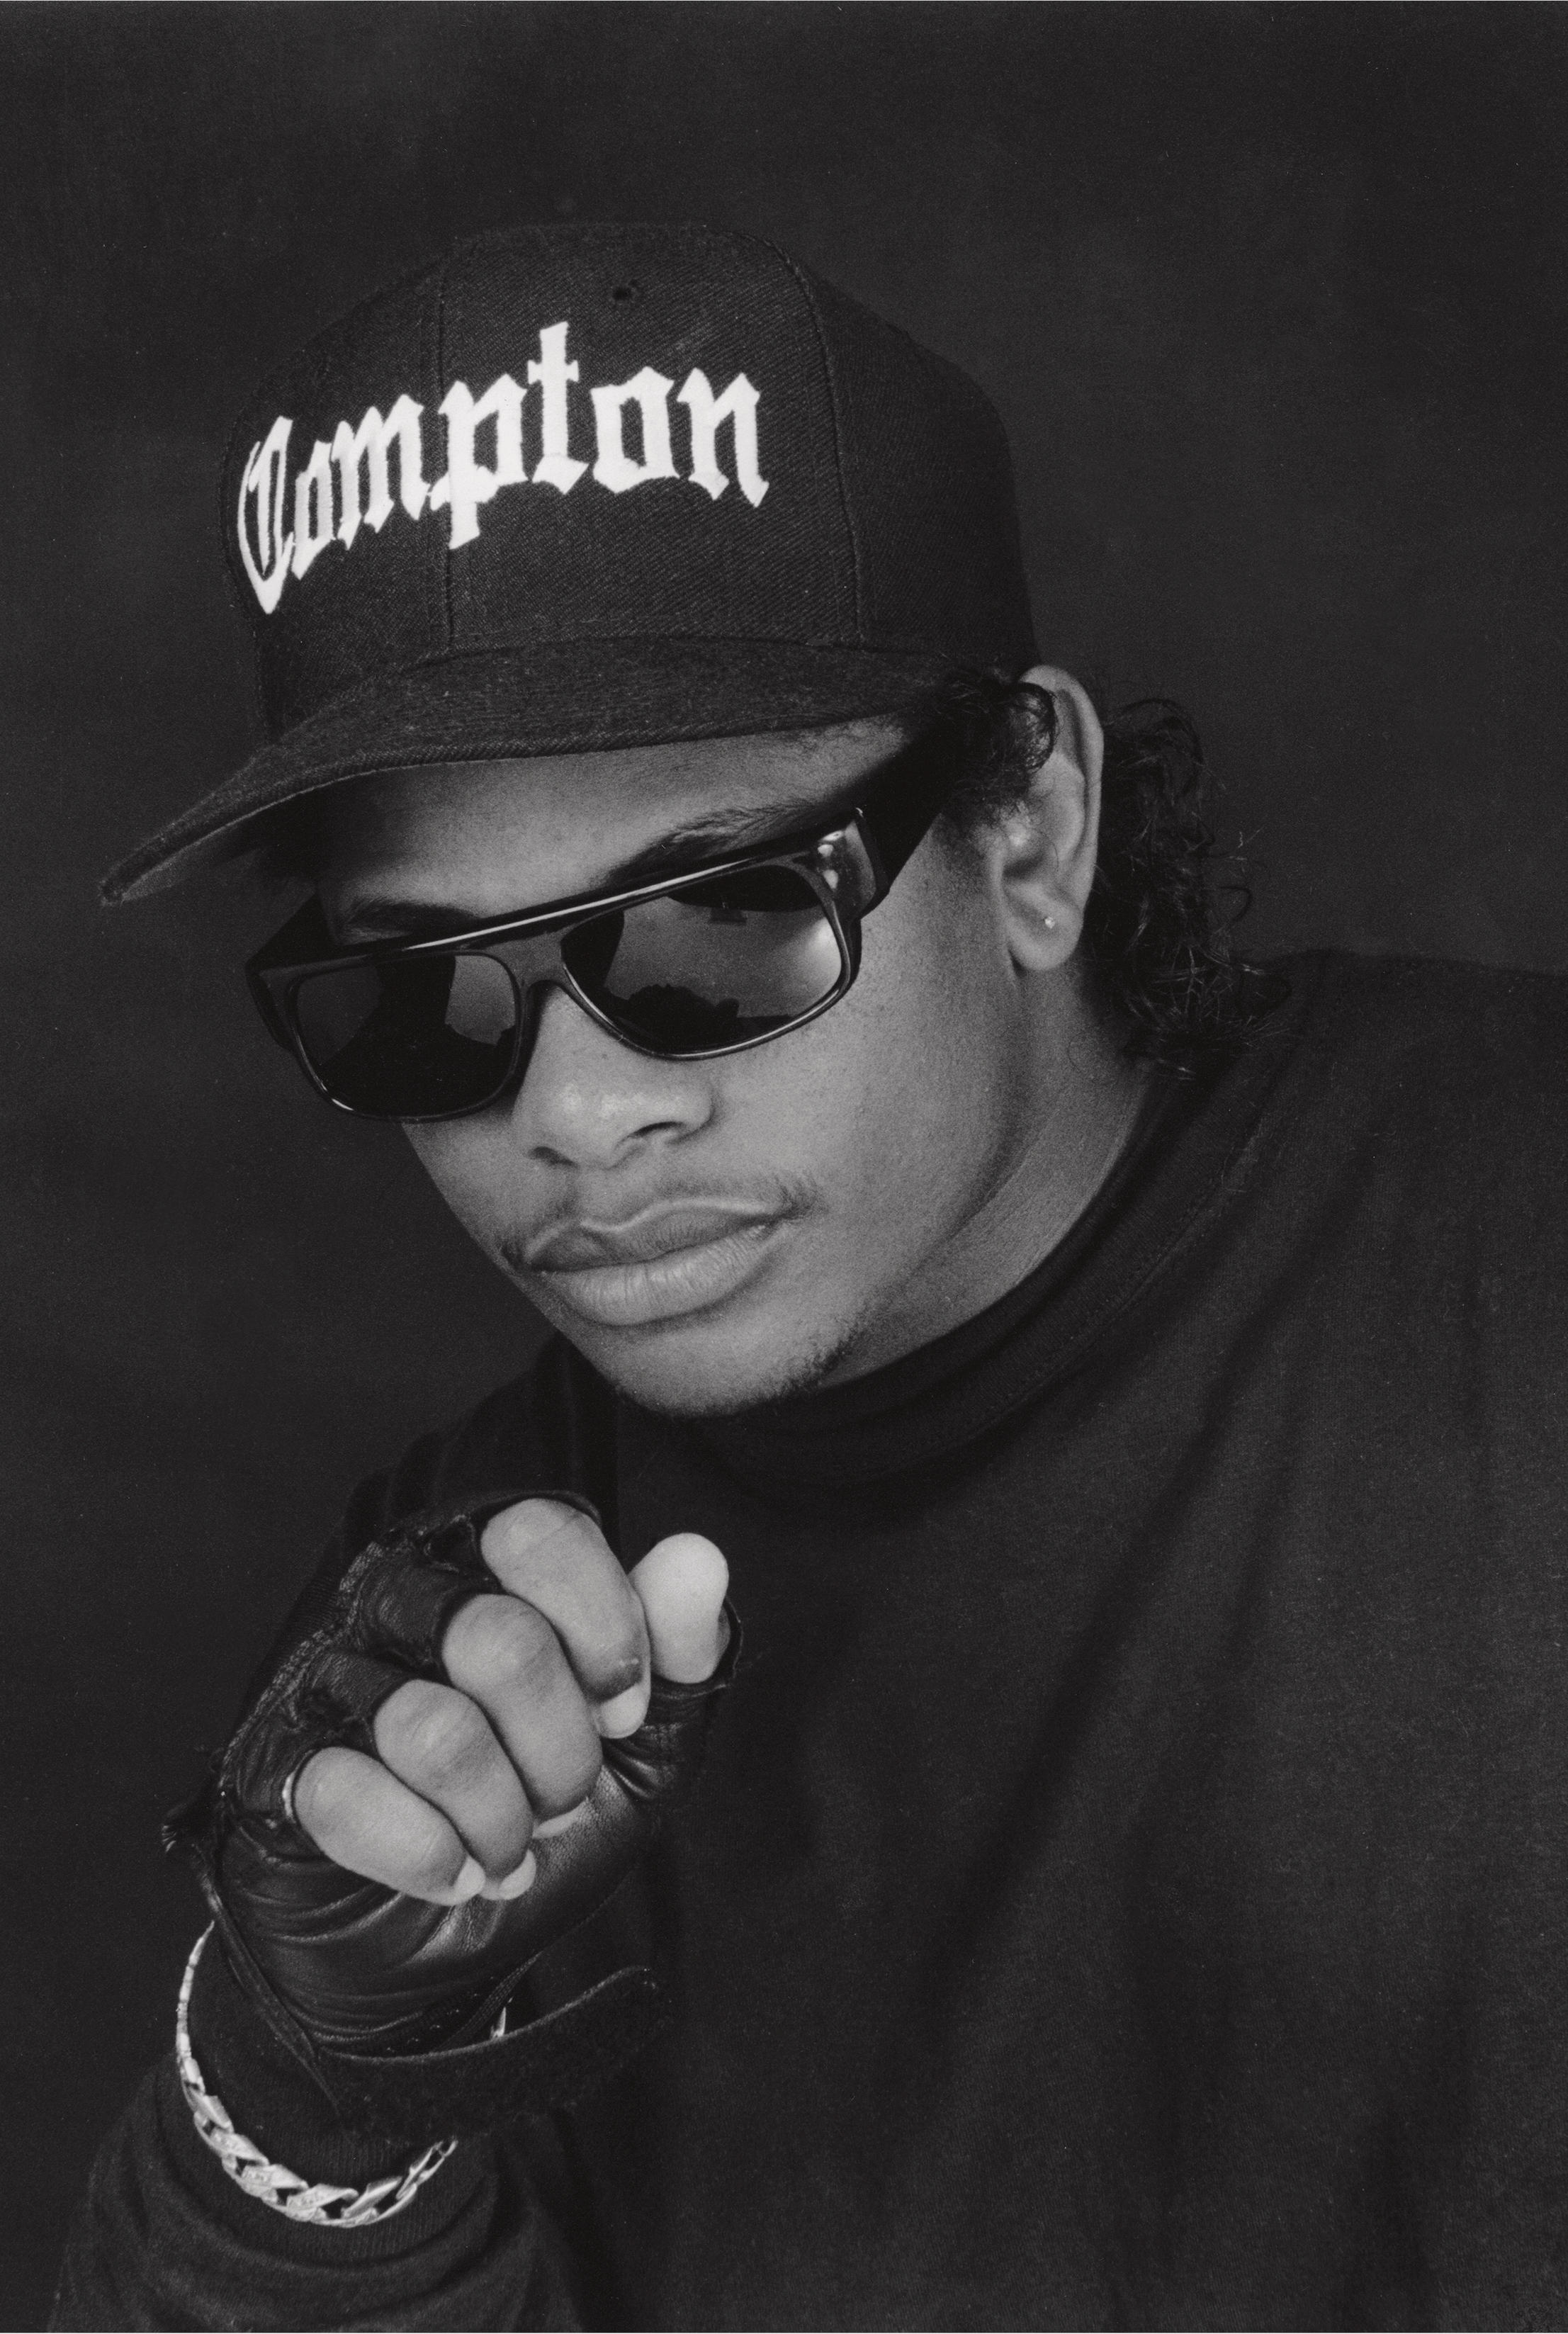 Rodriguez photographed rapper Eazy-E and his group N.W.A. in Burbank, Calif...